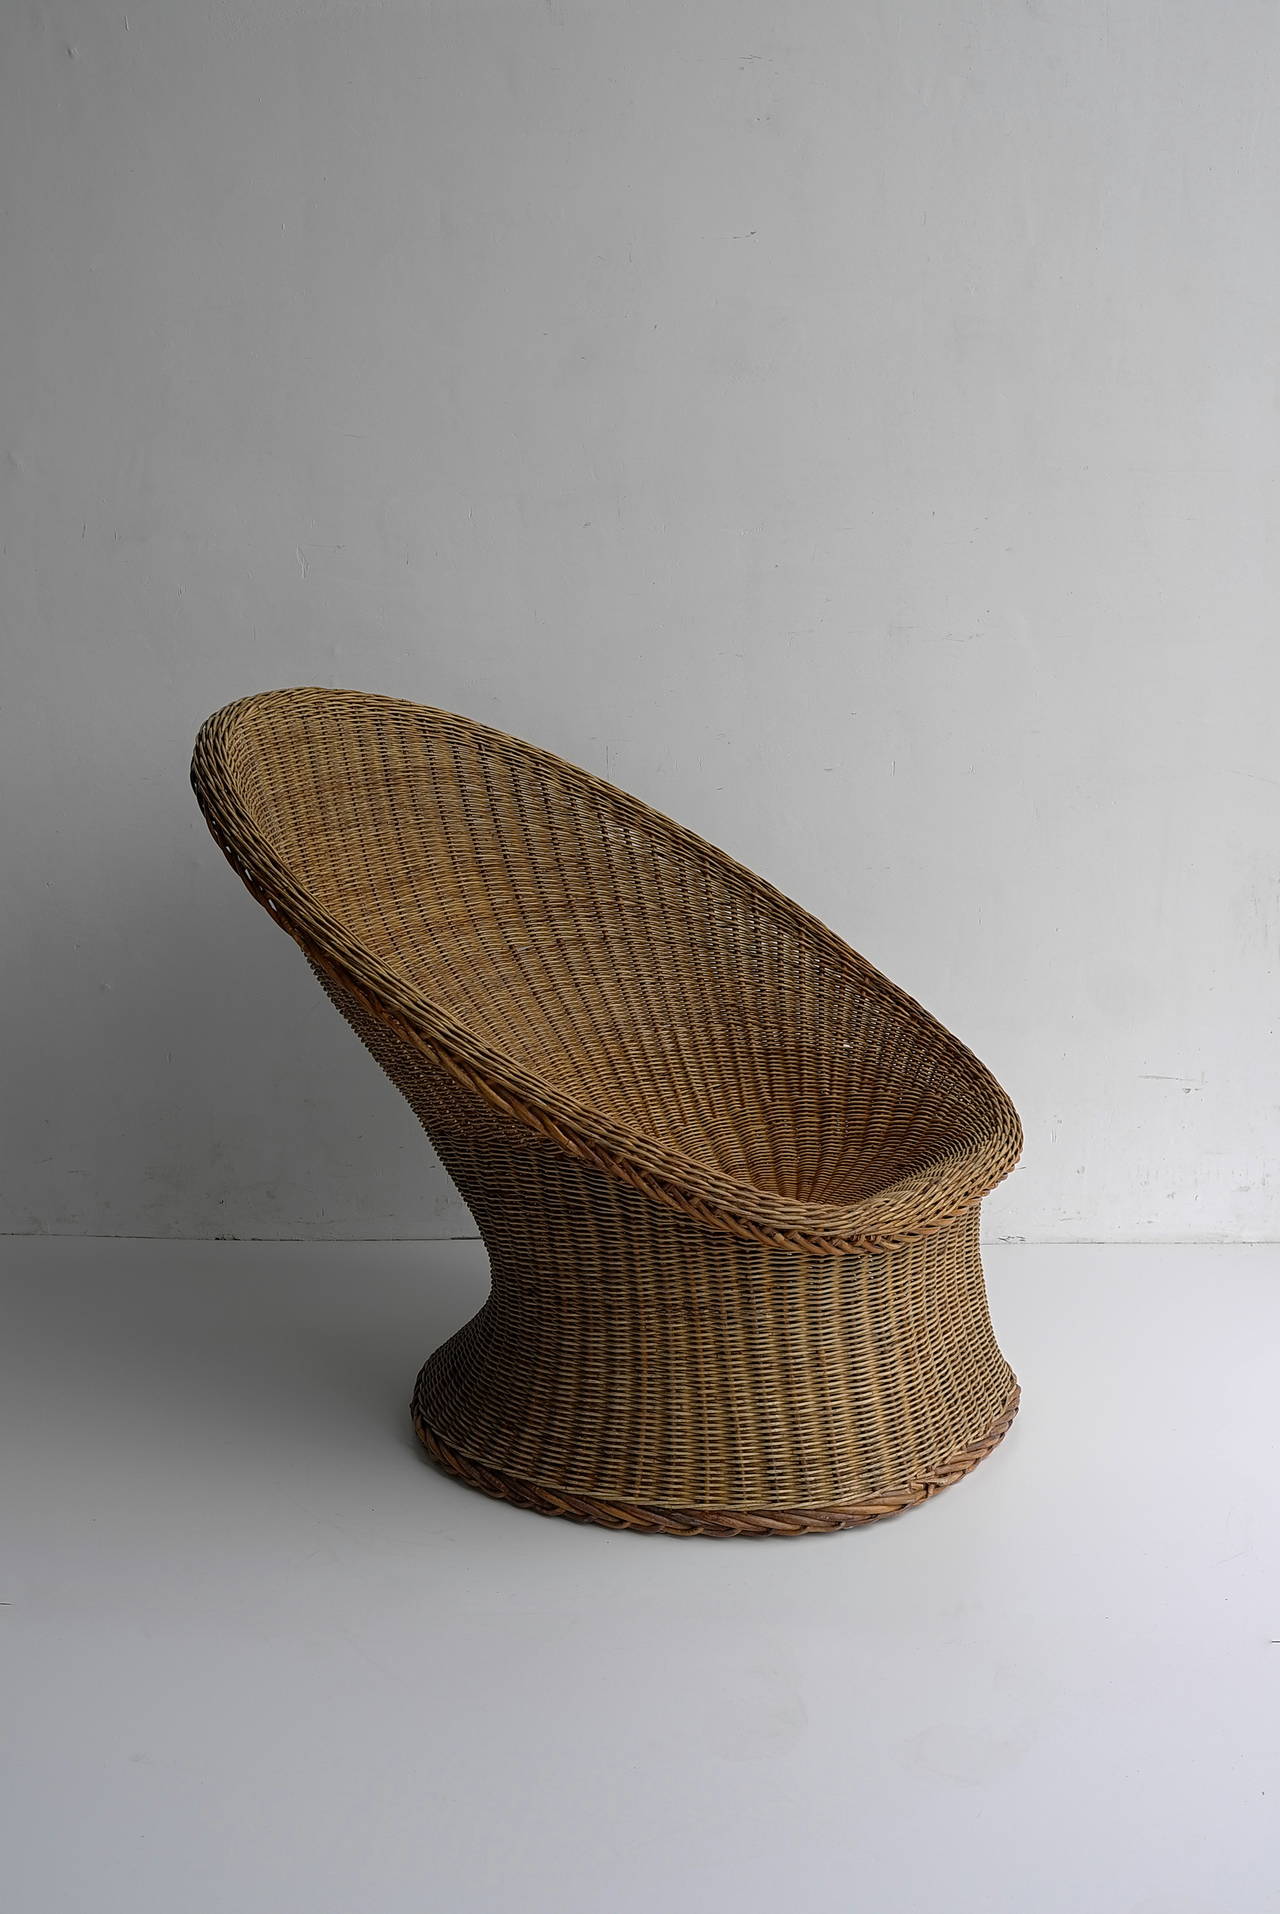 Rare wicker armchair by Wim Den Boon, Holland 1952

This armchair was designed by Wim Den Boon in 1952 and produced by the Jonkers brothers in Noordwolde.

This armchair was showed at the Amsterdam Stedelijk Museum exposition in